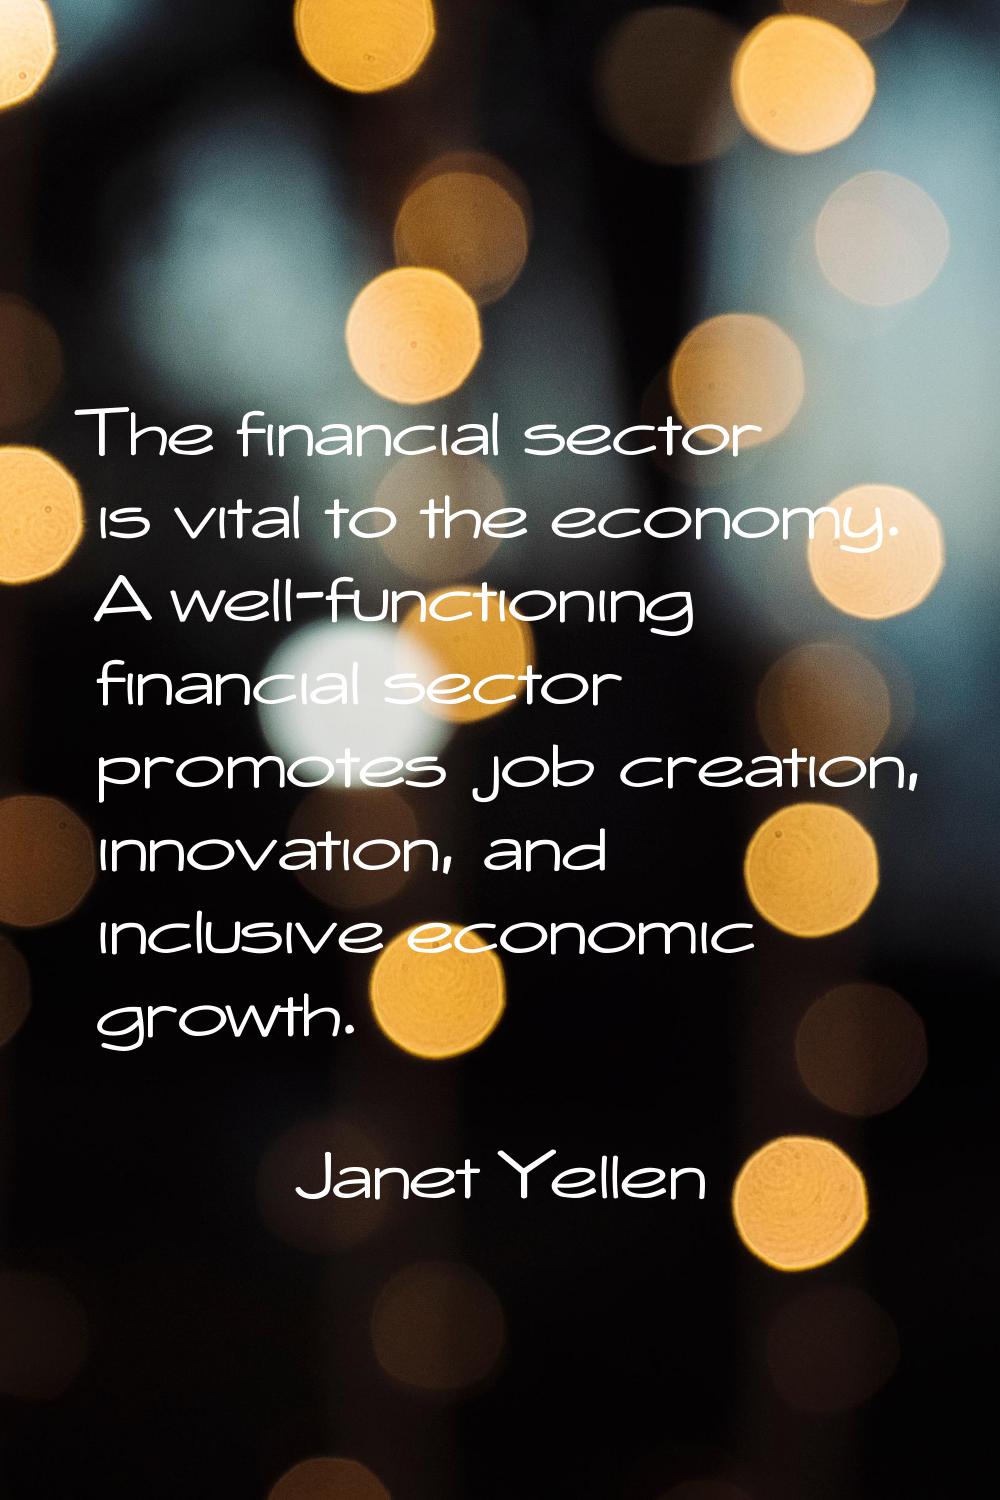 The financial sector is vital to the economy. A well-functioning financial sector promotes job crea